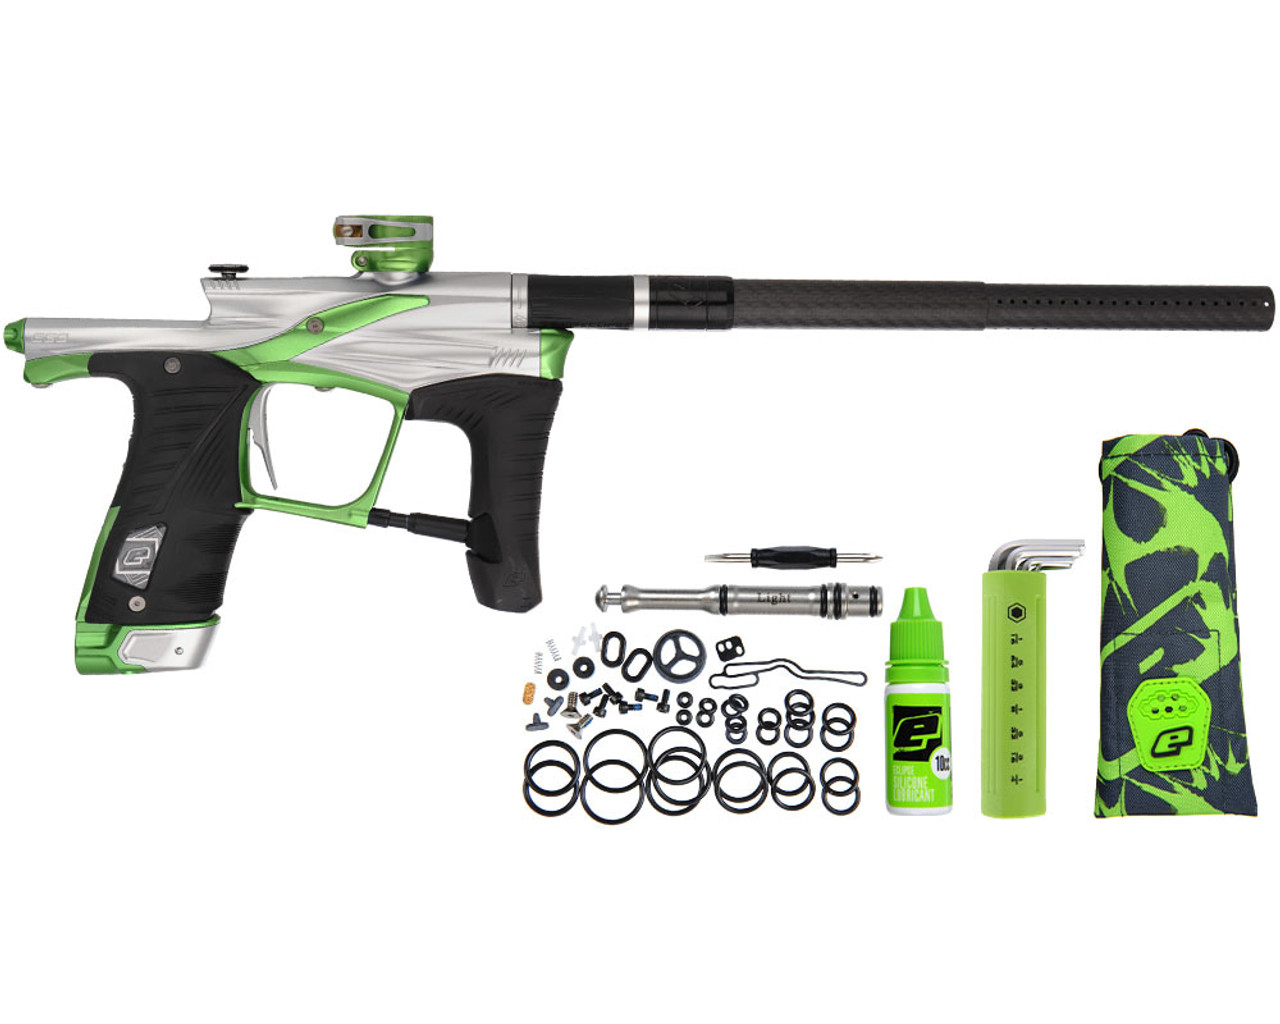 Planet Eclipse Ego LV 1.6 Paintball Marker - Shooting Video 